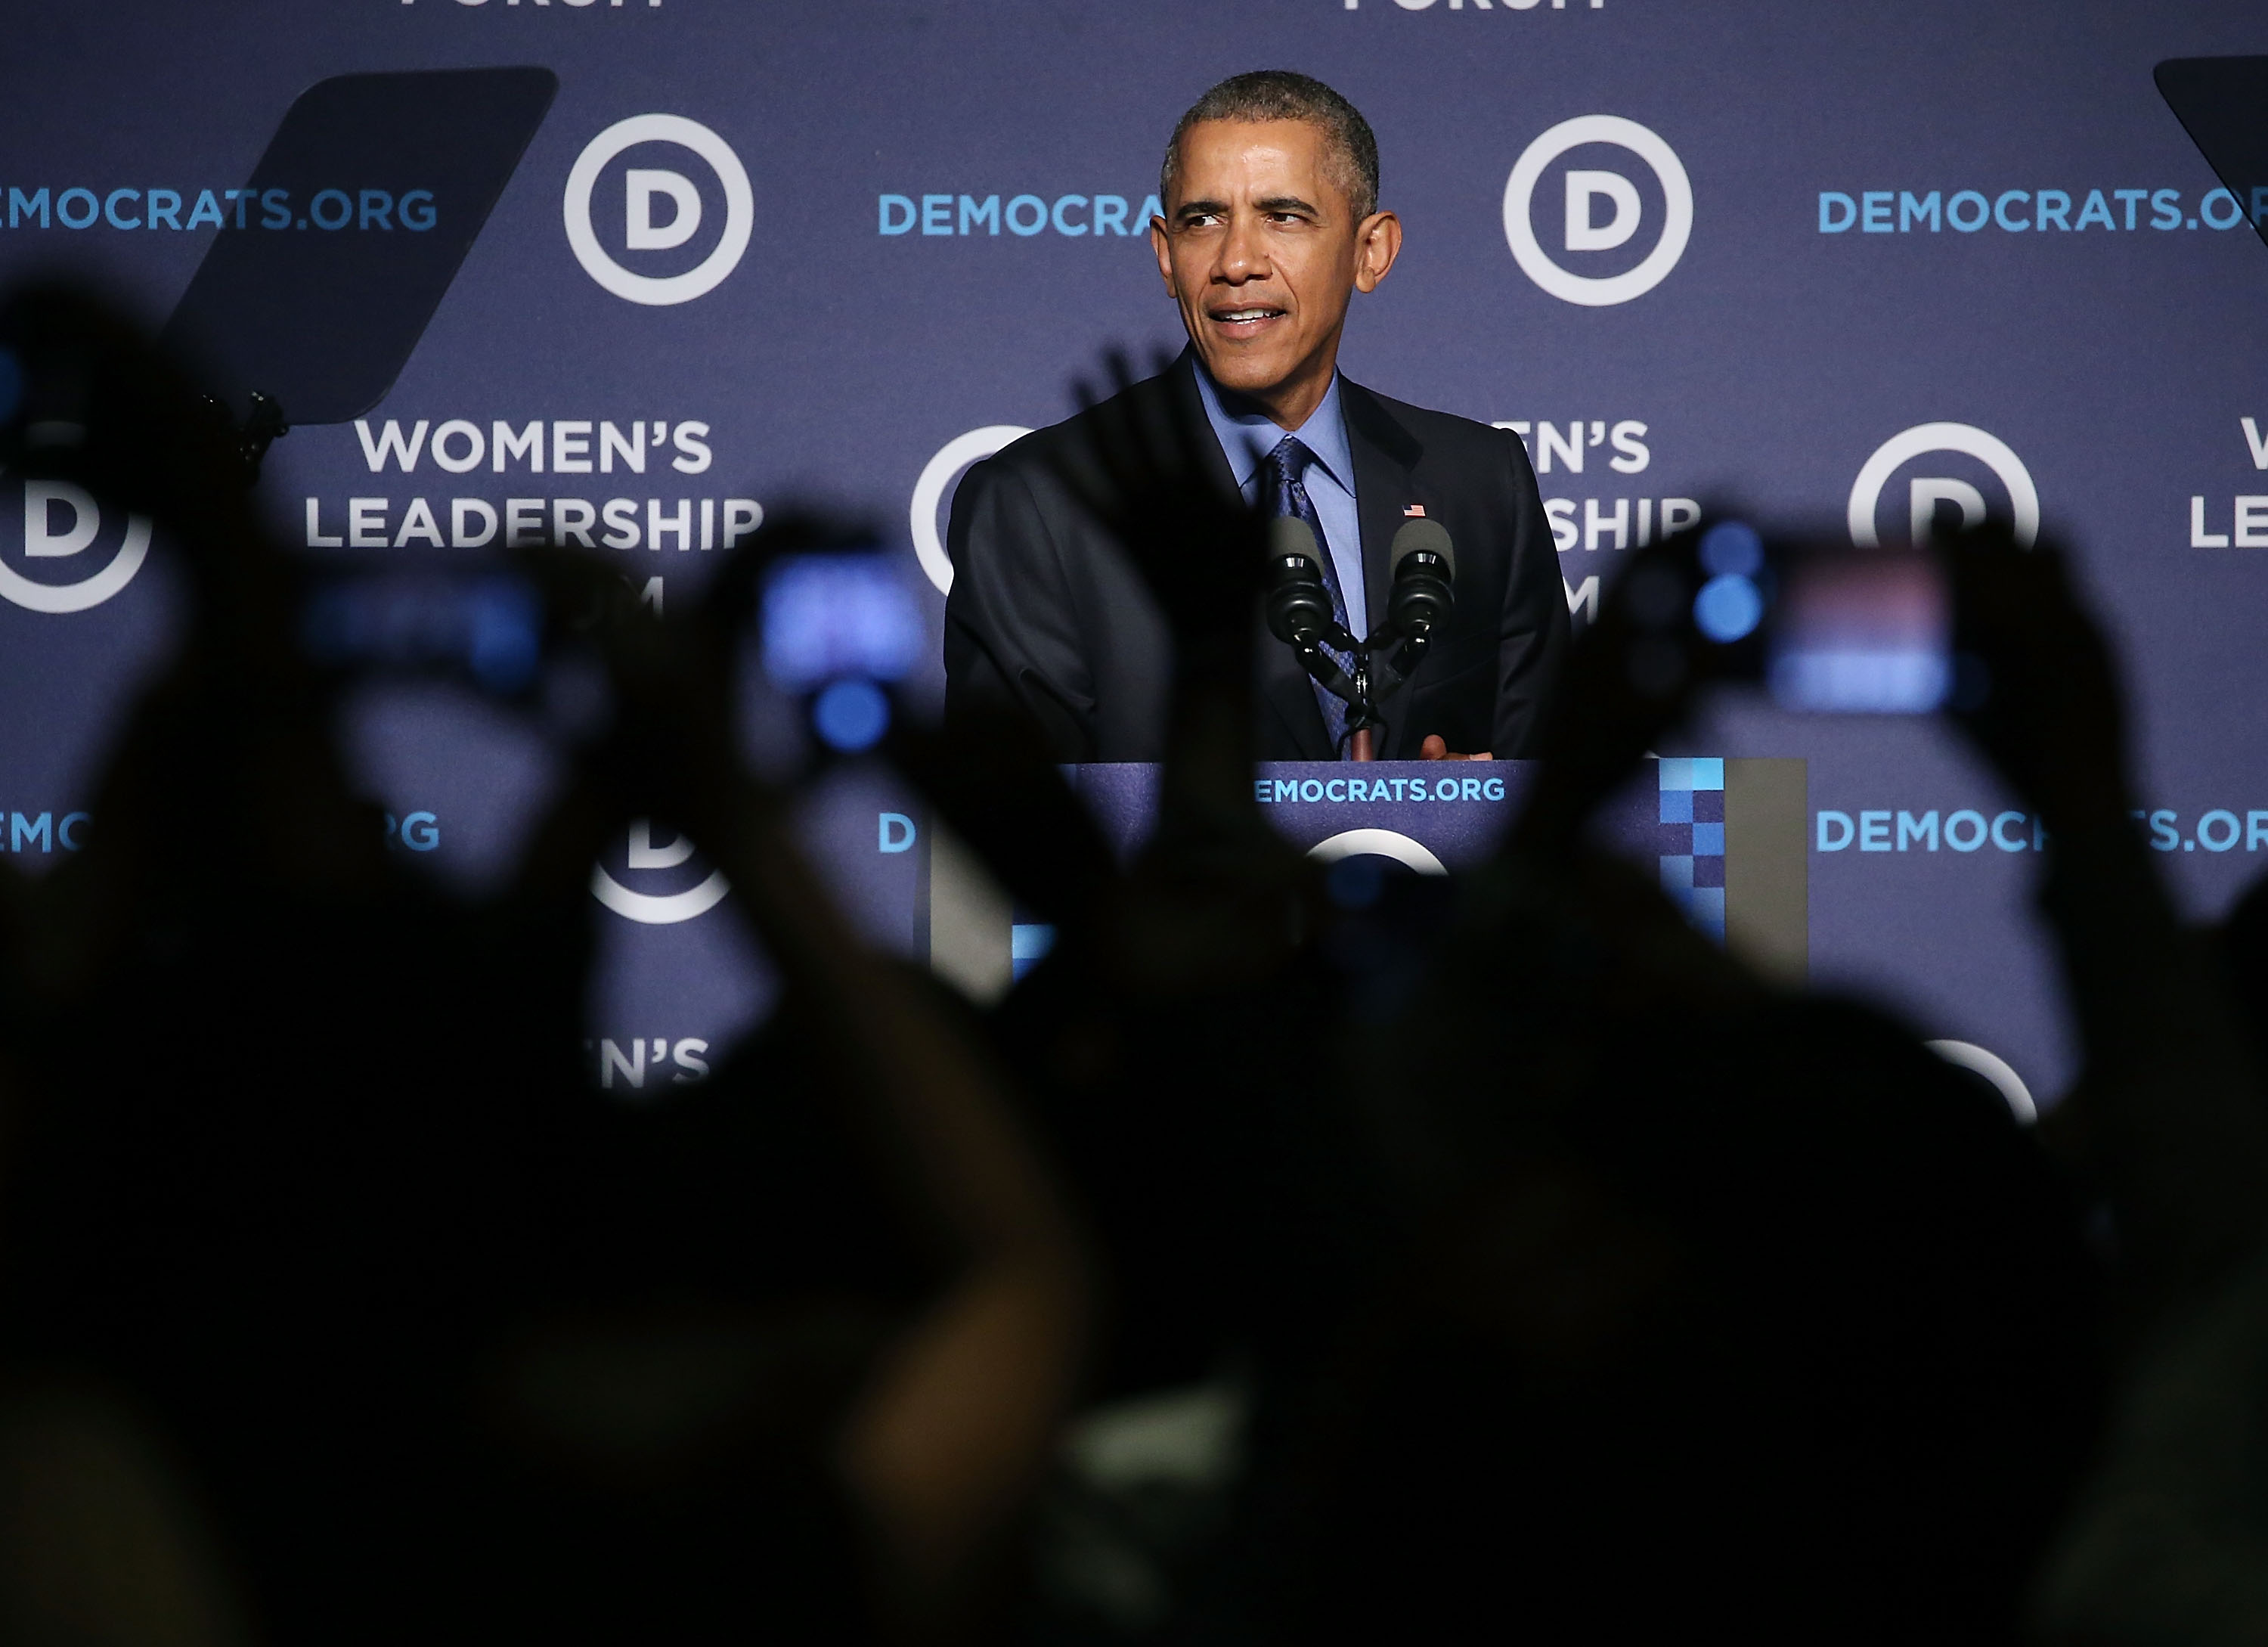 Obama, Democratic Presidential Candidates Attend Women's Leadership Forum Conf.